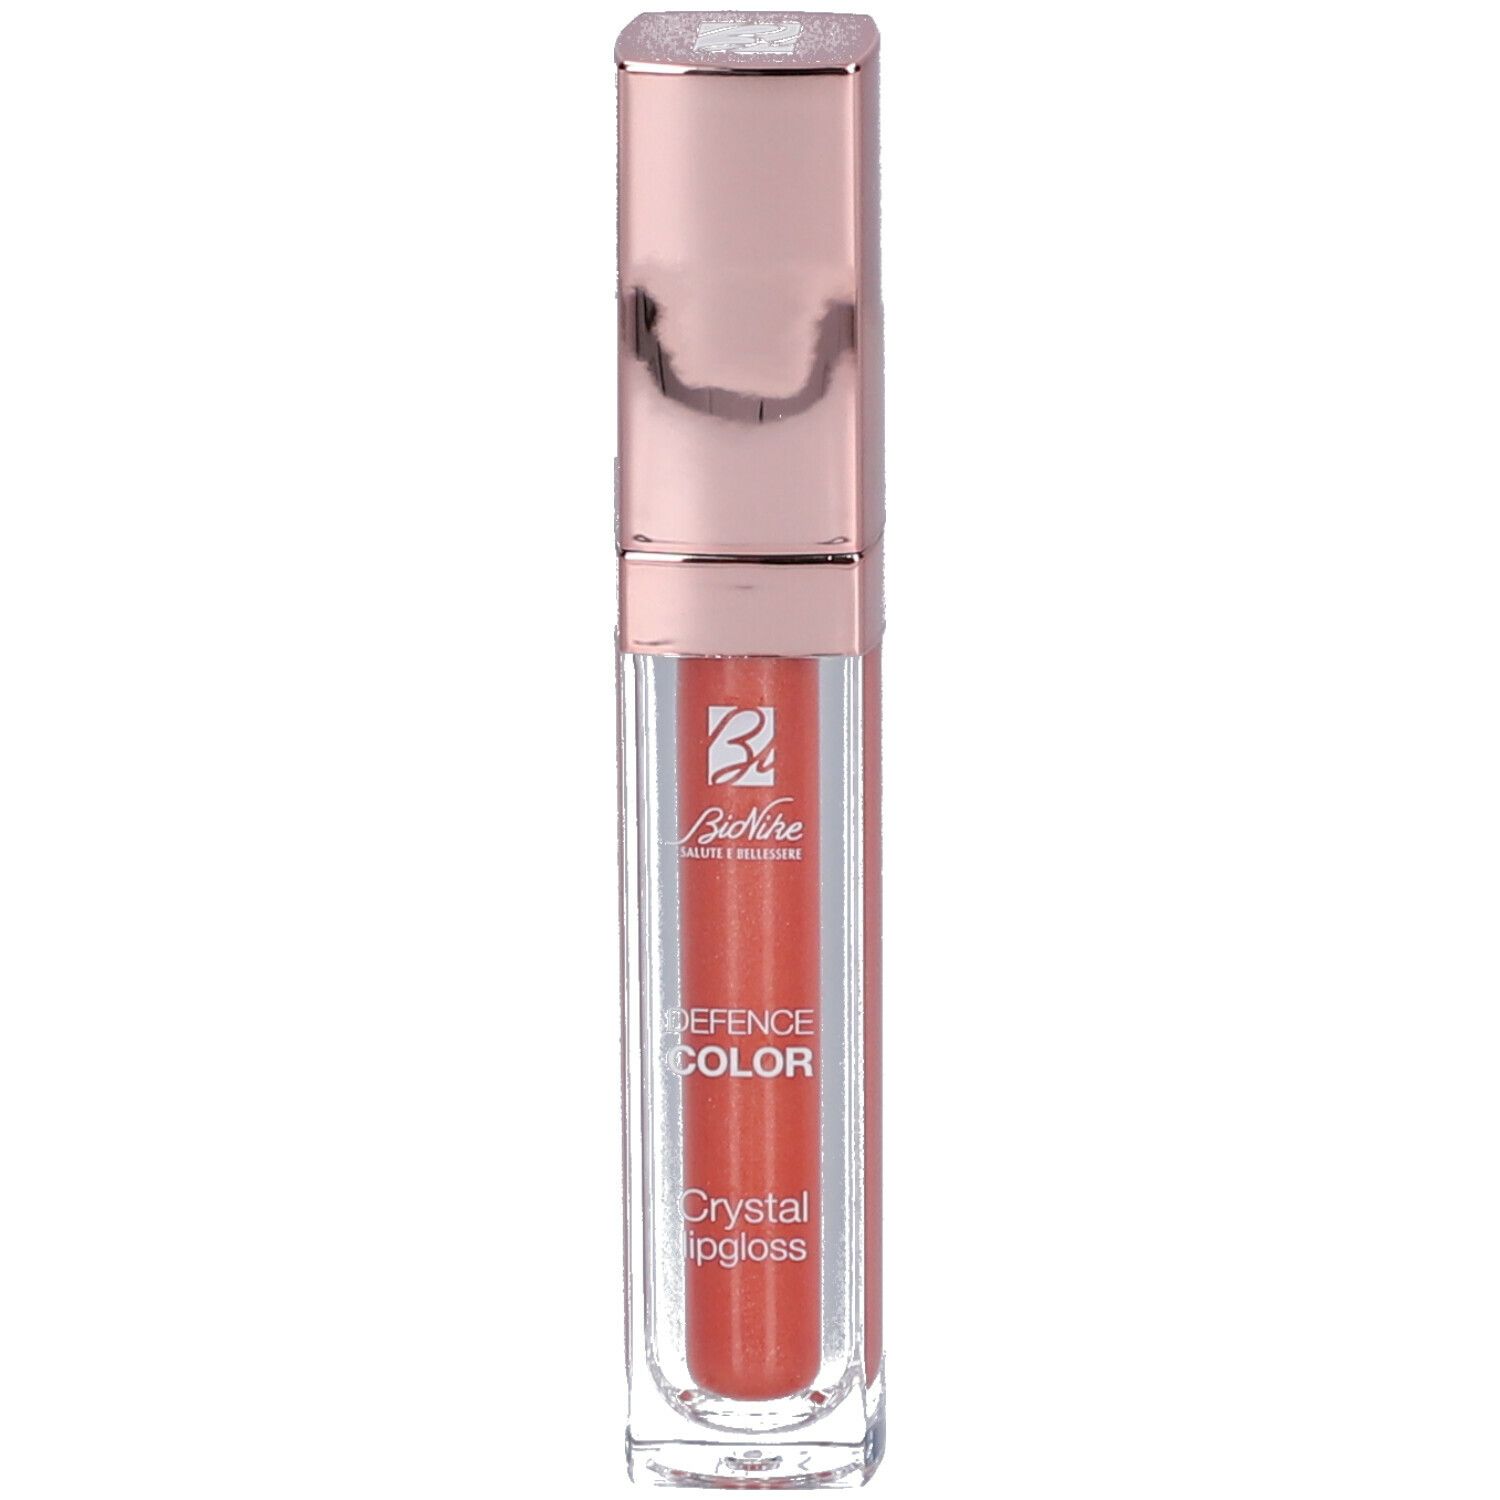 BioNike Defence Color Crystal Lipgloss 304 Coral